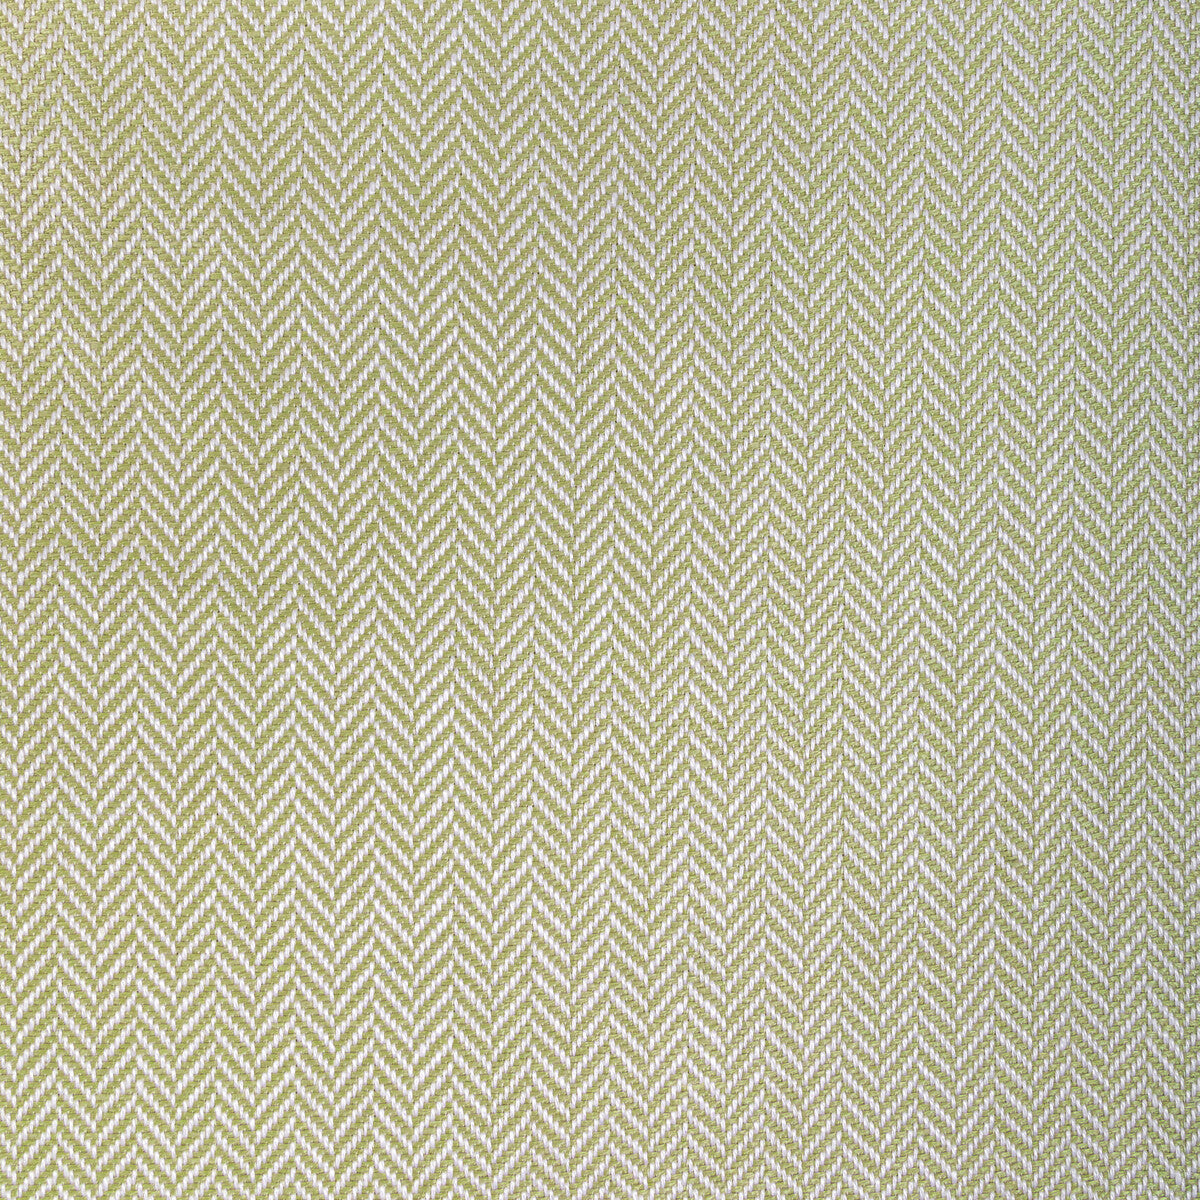 Kerolay Linen Weave fabric in celery color - pattern 8022107.3.0 - by Brunschwig &amp; Fils in the Lorient Weaves collection